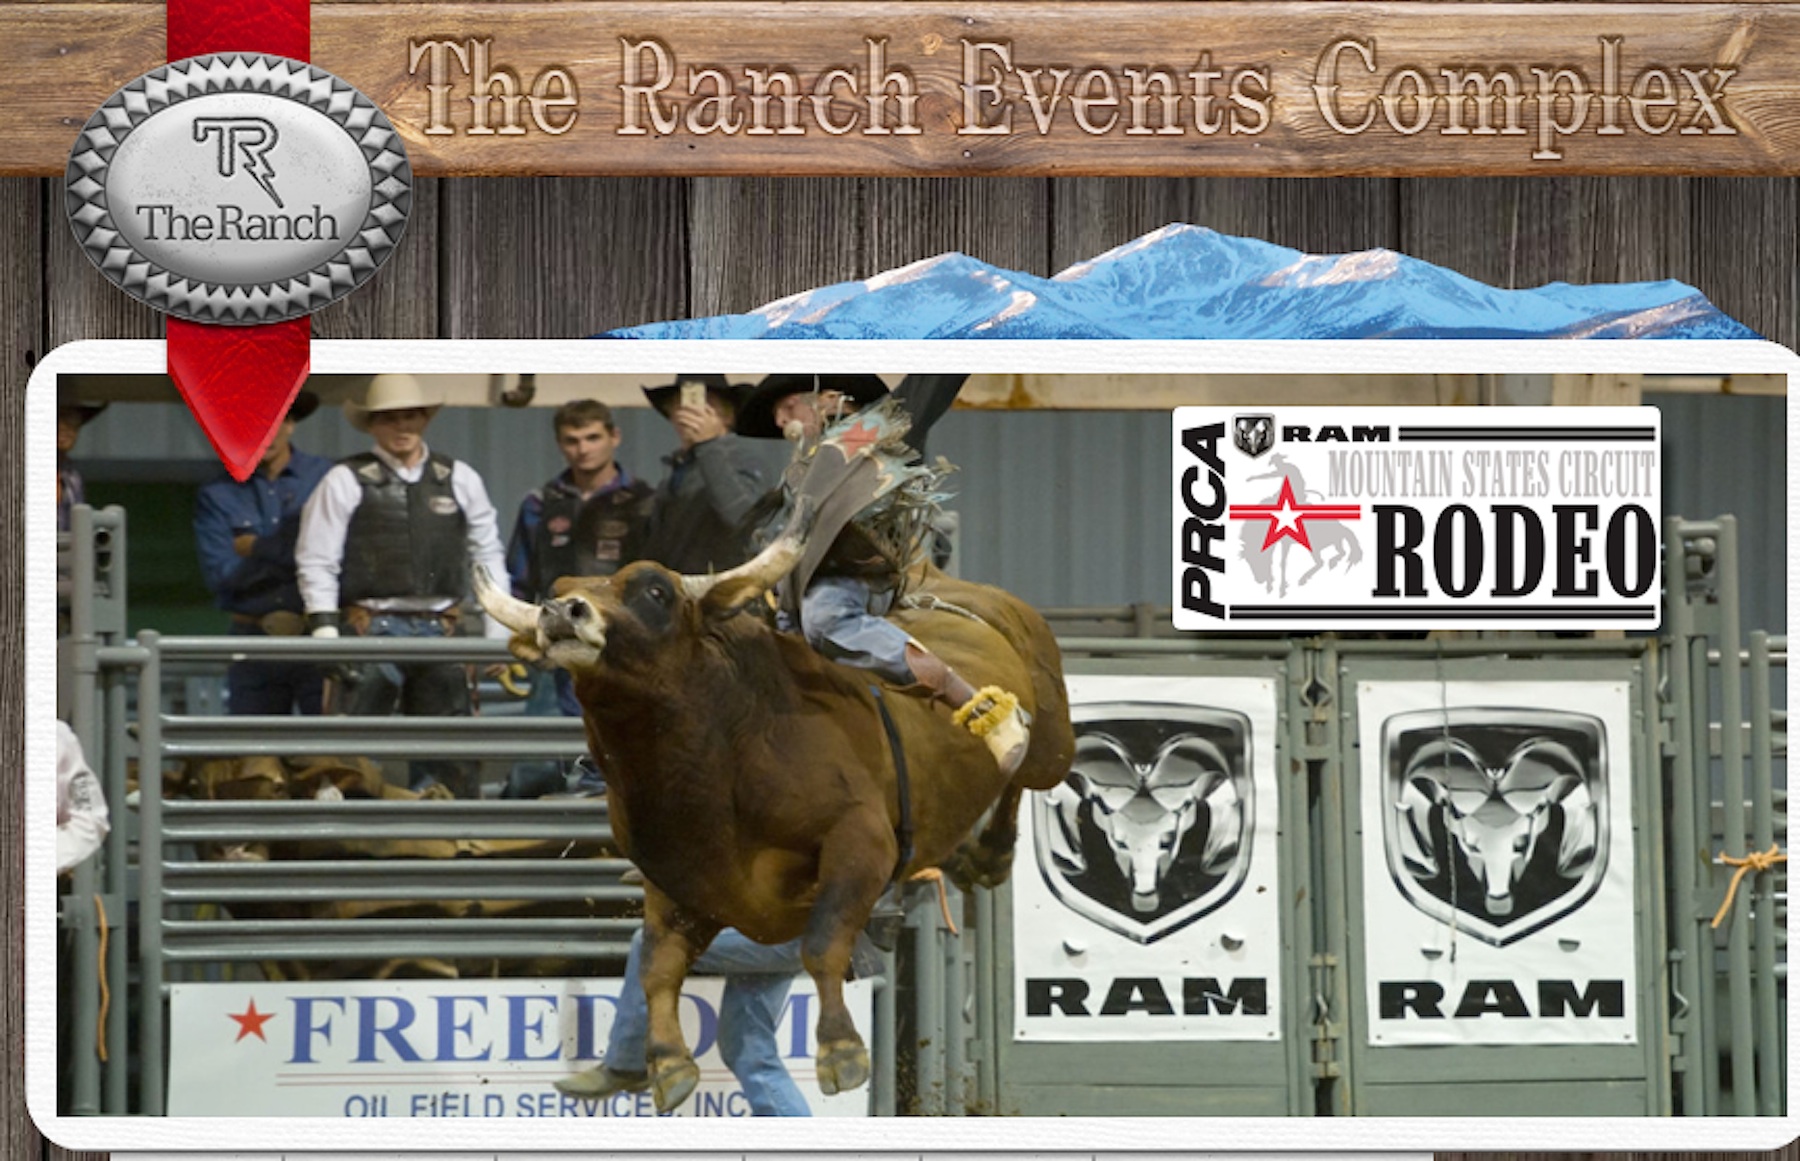 PRCA RAM rodeo finals on Thursday at the Ranch in Loveland